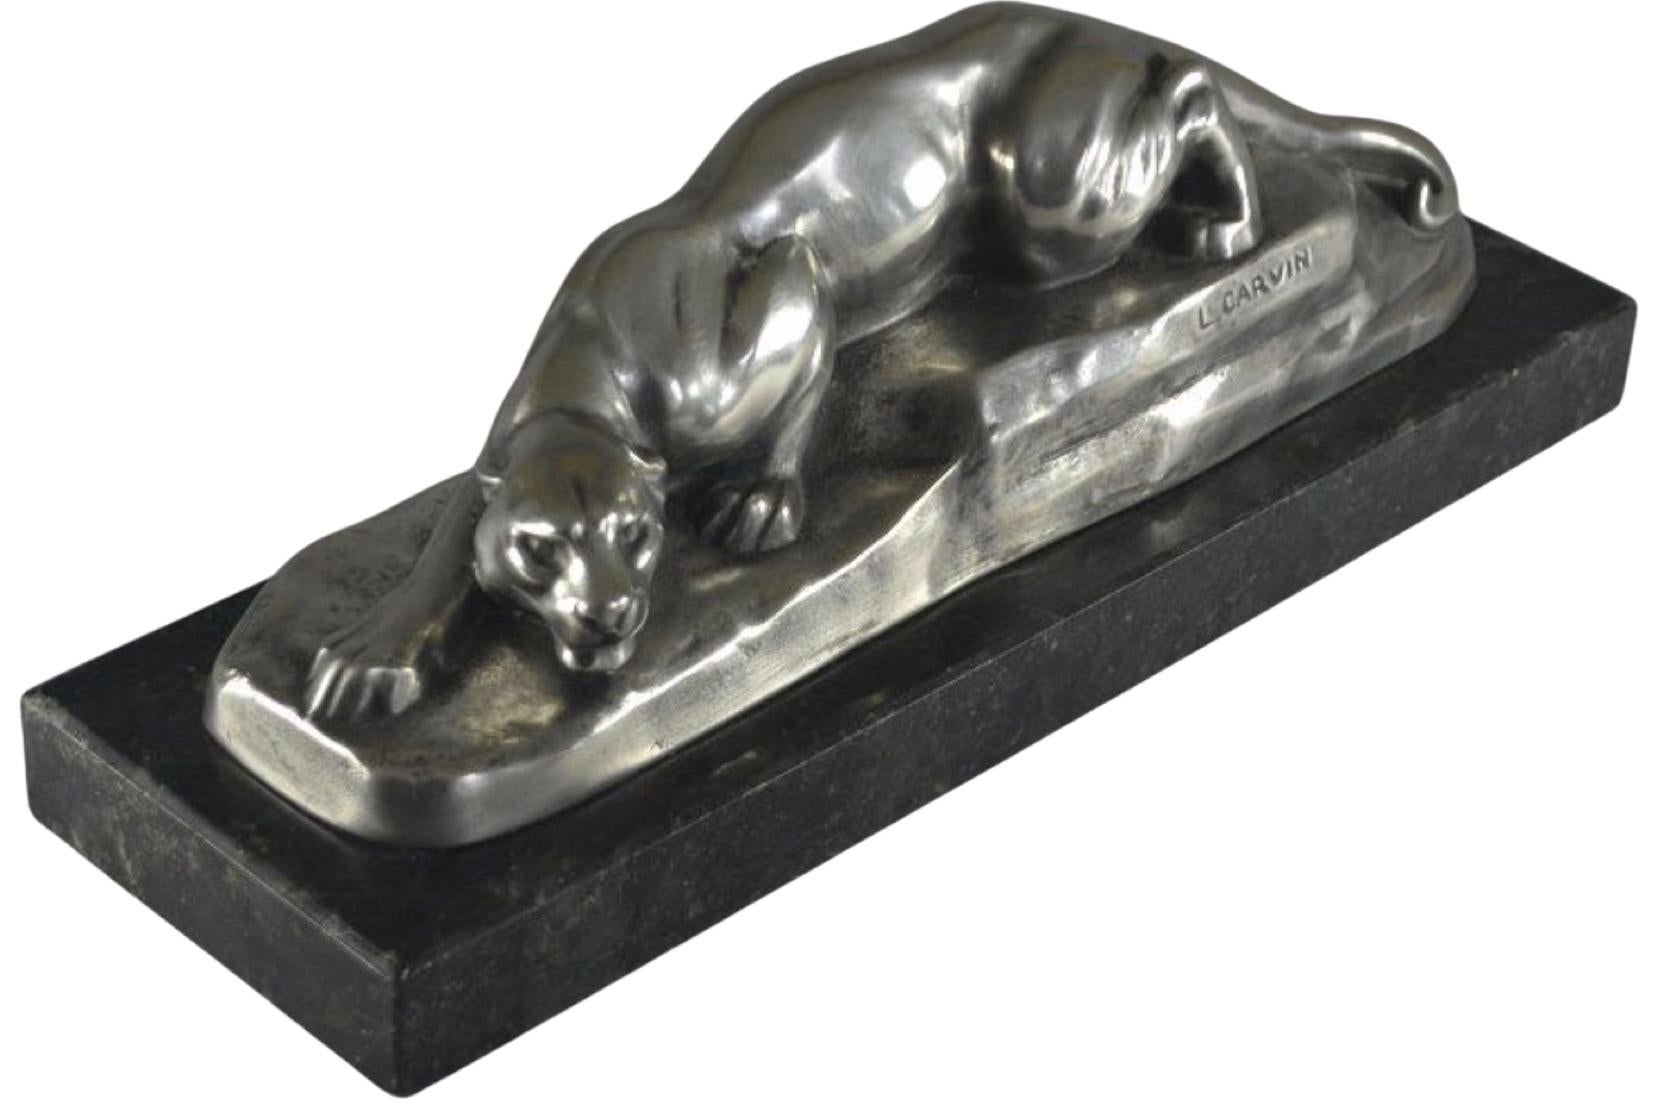 Louis Carvin Cubist bronze prowling panther silver-plated on a black marble base. Louis Carvin was a renowned French sculptor known for his contributions to the Cubist movement. He was born on January 14, 1875, in Paris, France, and passed away on